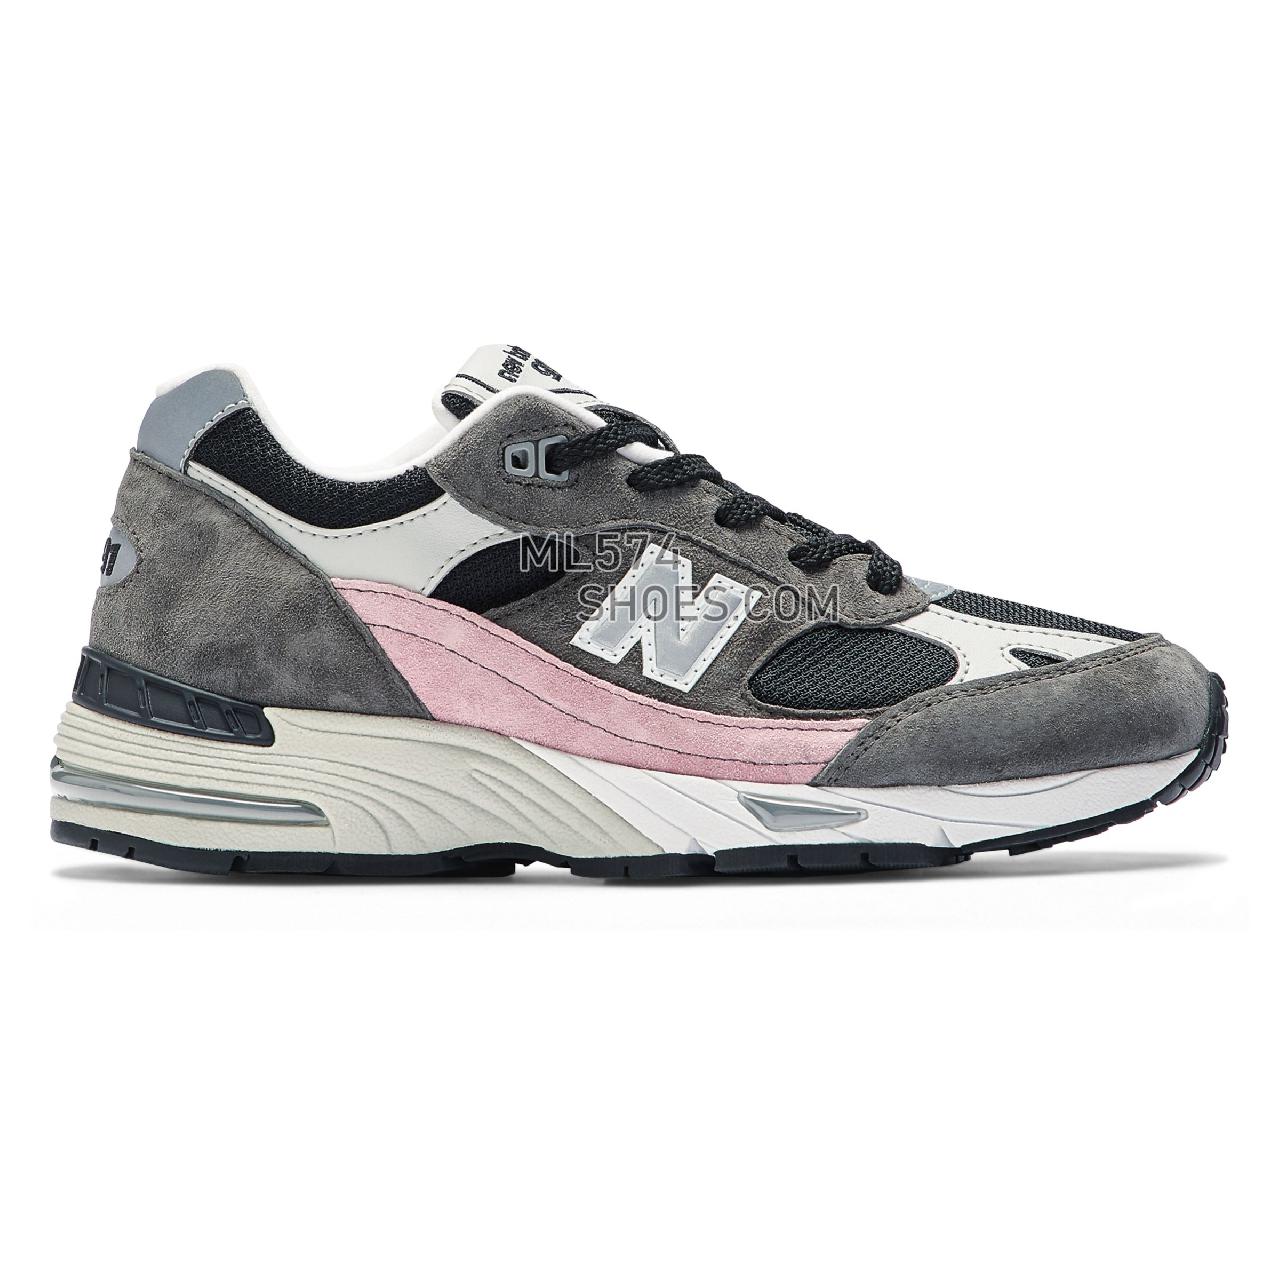 New Balance Made in UK 991 - Women's Made in USA And UK Sneakers - Black with Grey and Beige - W991KWG